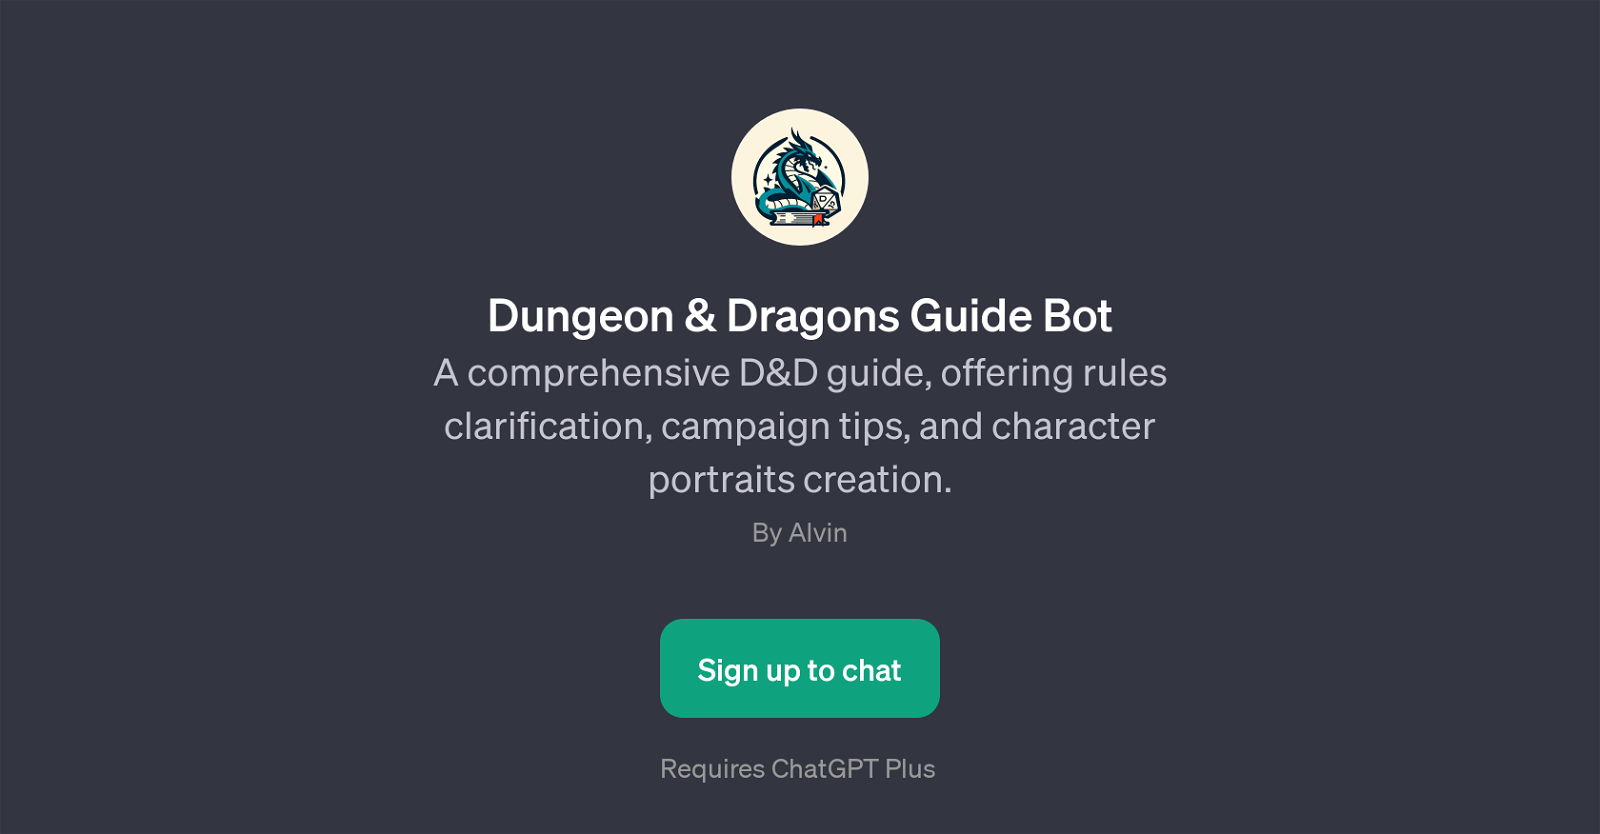 Dungeon & Dragons Guide Bot website